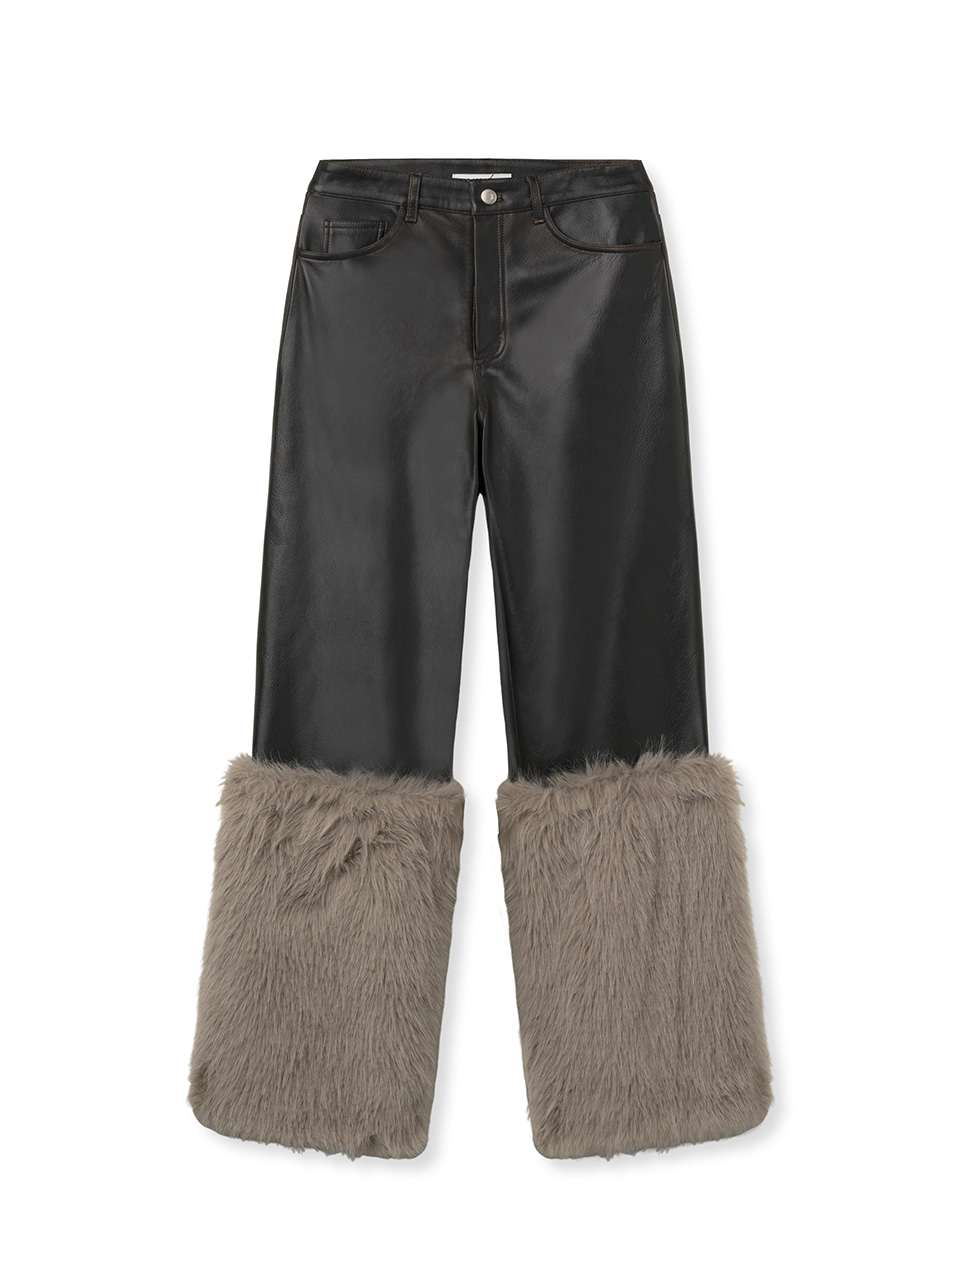 STRAIGHT LEATHER PANTS (BROWN)